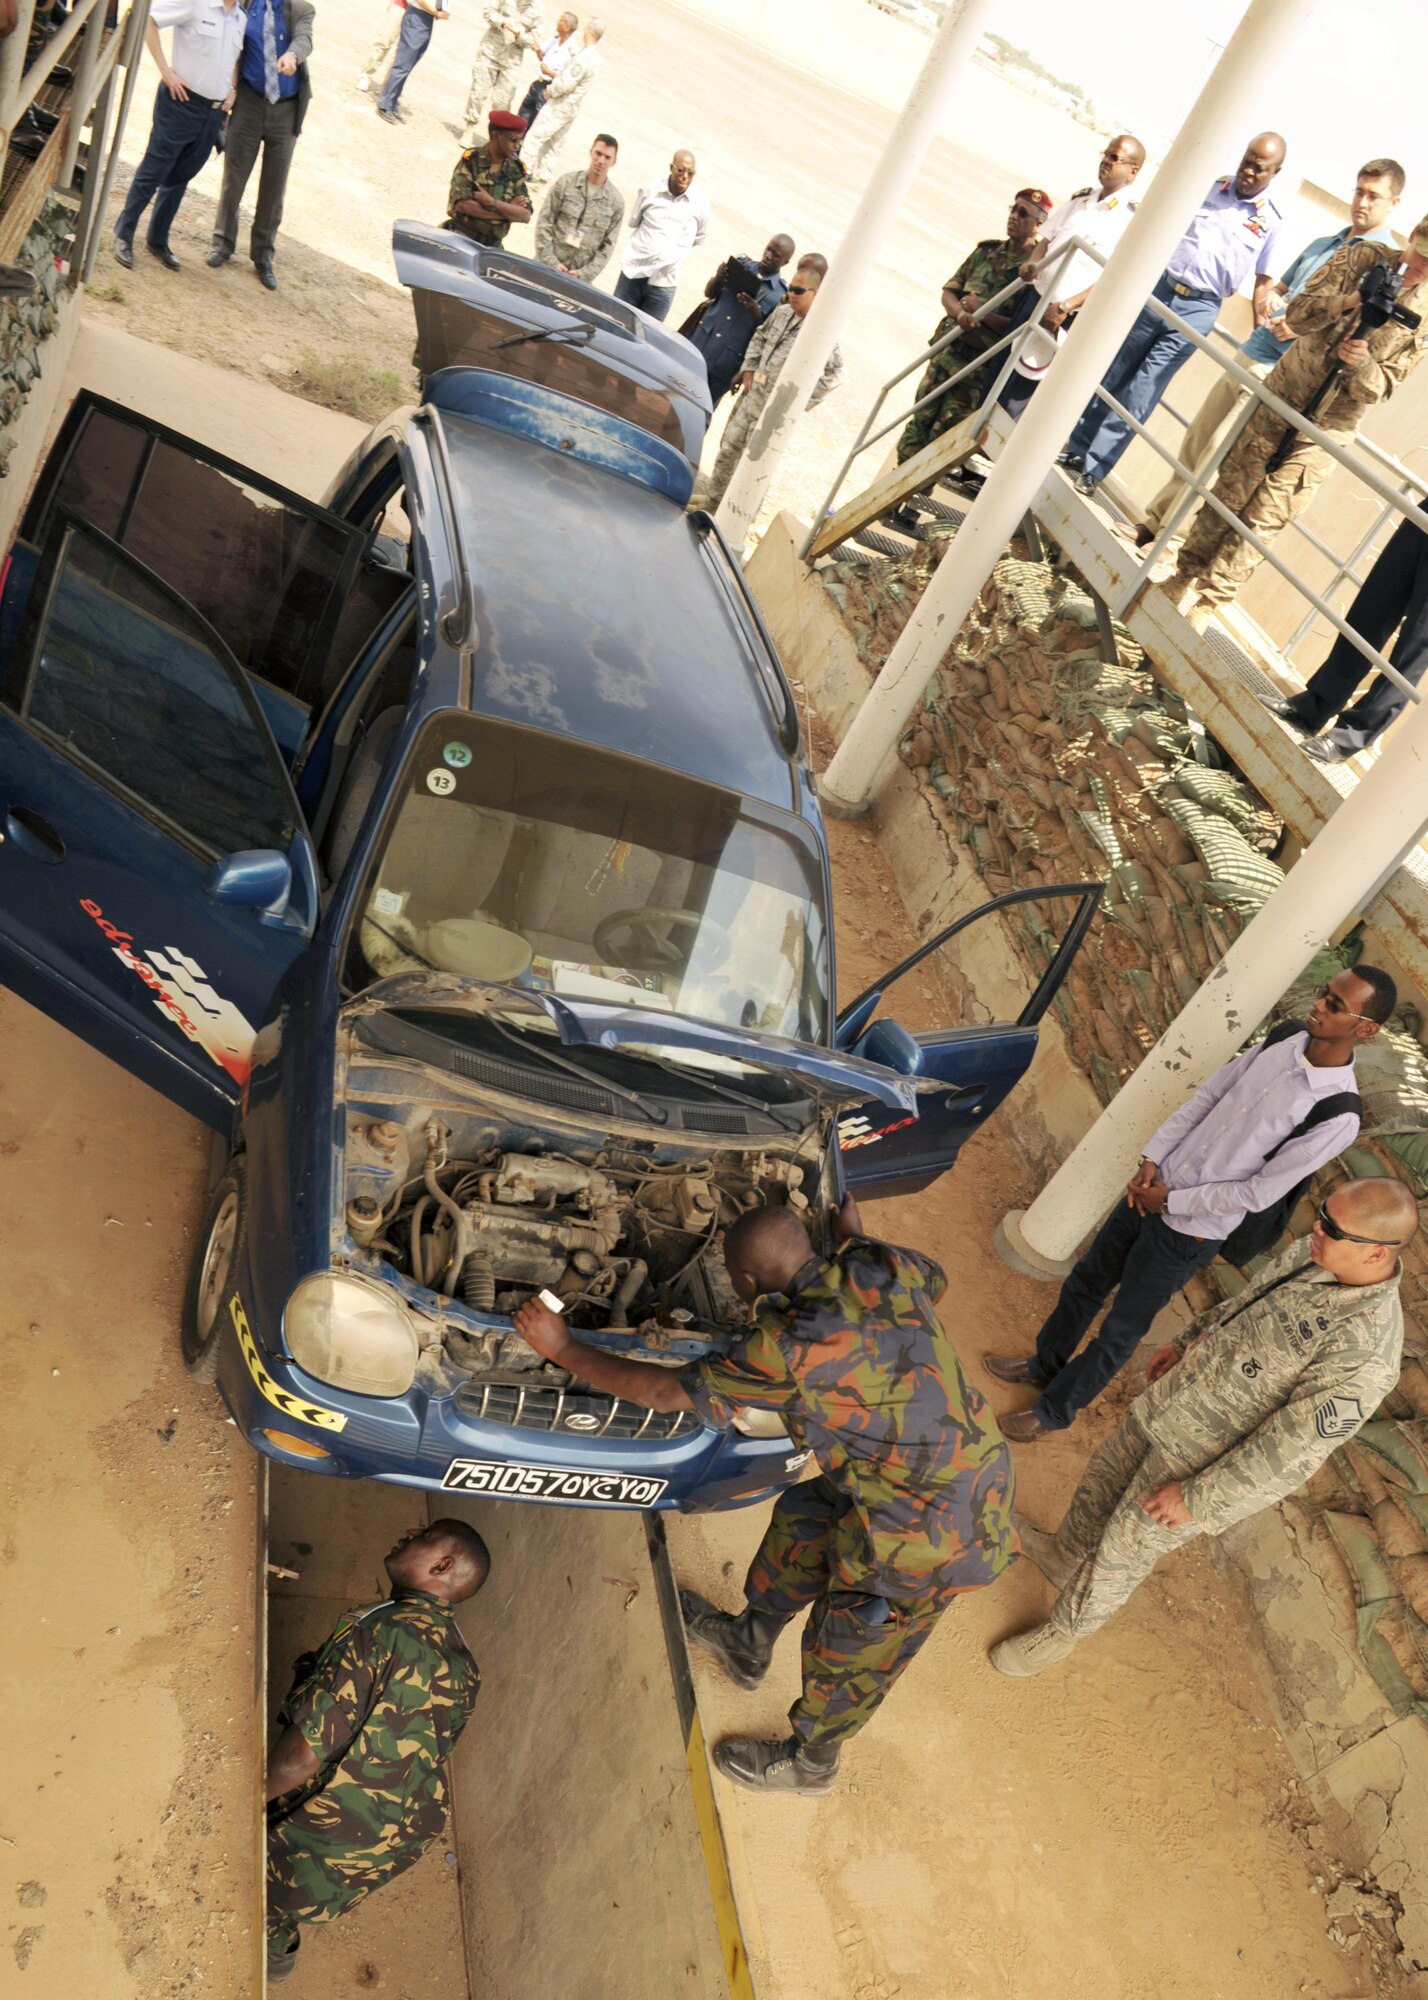 Kenya and Tanzania air force members conduct a vehicle inspection as part of an installation security knowledge exchange during African Partnership Flight-Djibouti (APF) Feb. 10, 2015, at Djibouti Air Base. APF is the premiere program to bring together partner nations to increase cooperation and interoperability, which fosters stability and security throughout the continent. (U.S. Air Force Photo/Tech. Sgt. Ian Dean)